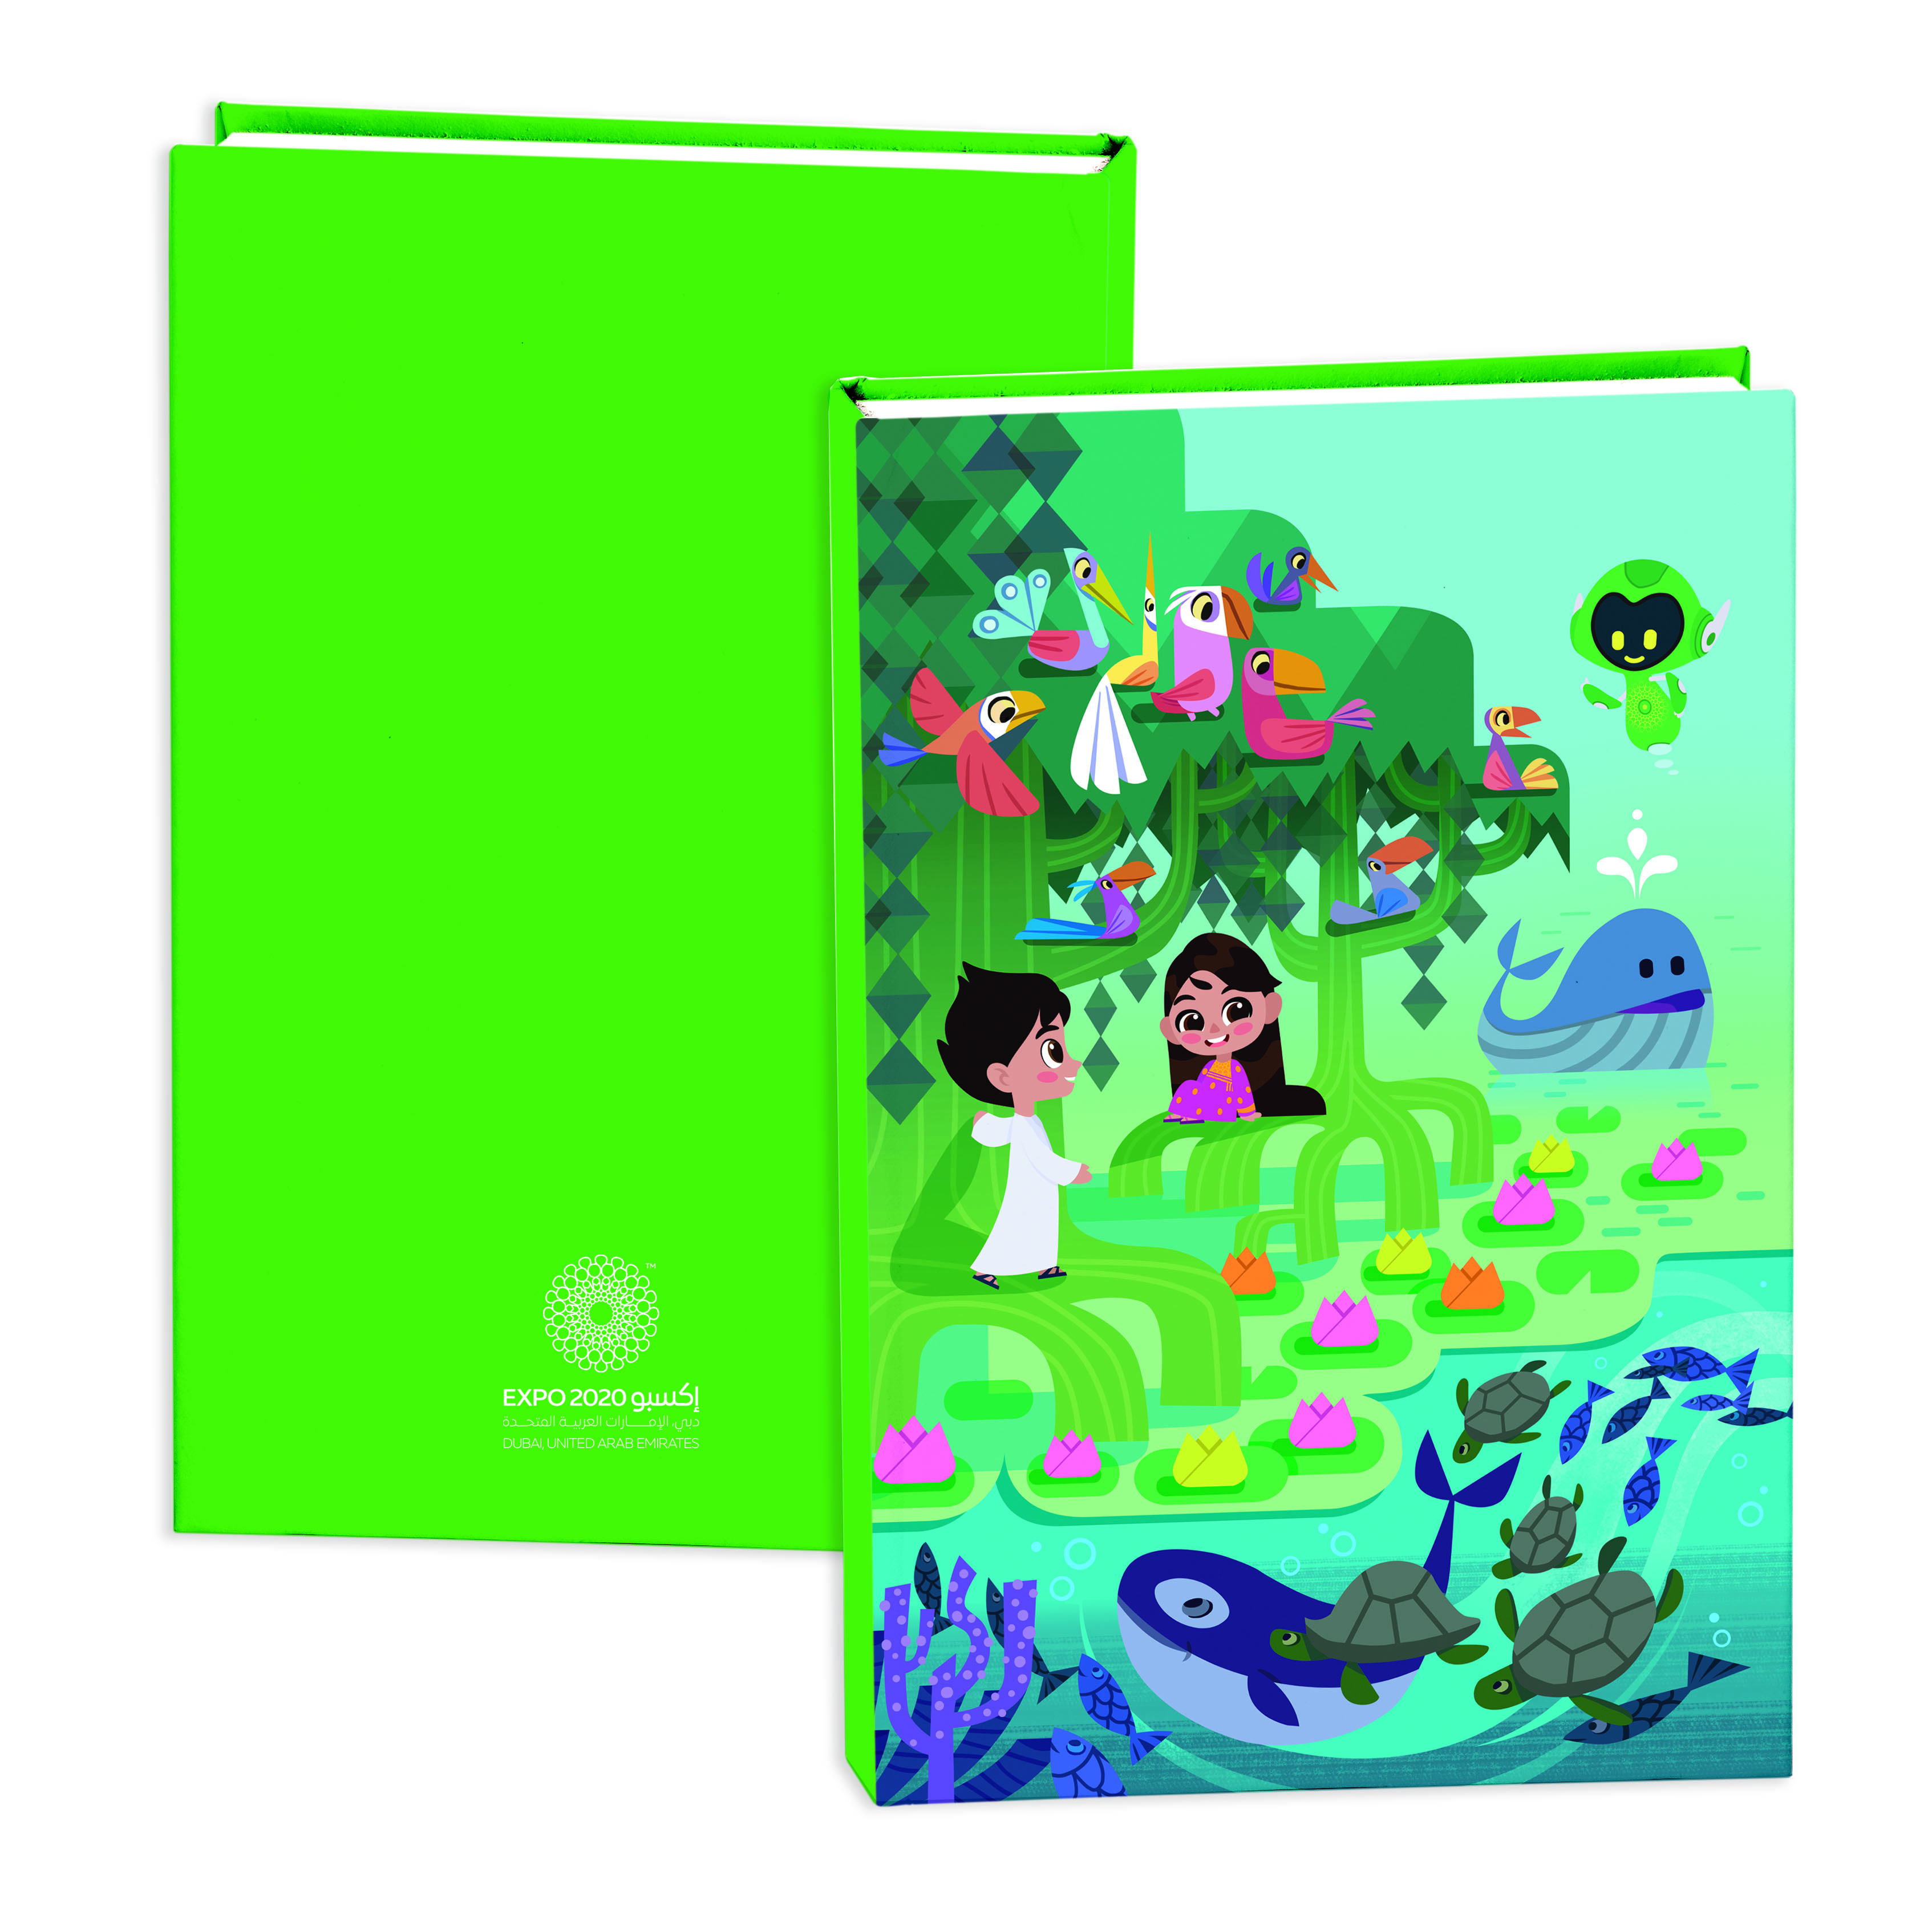 Expo 2020 Dubai Mascots Family B5 Hardcase Exercise Books Pack of 2 - 192 Pages